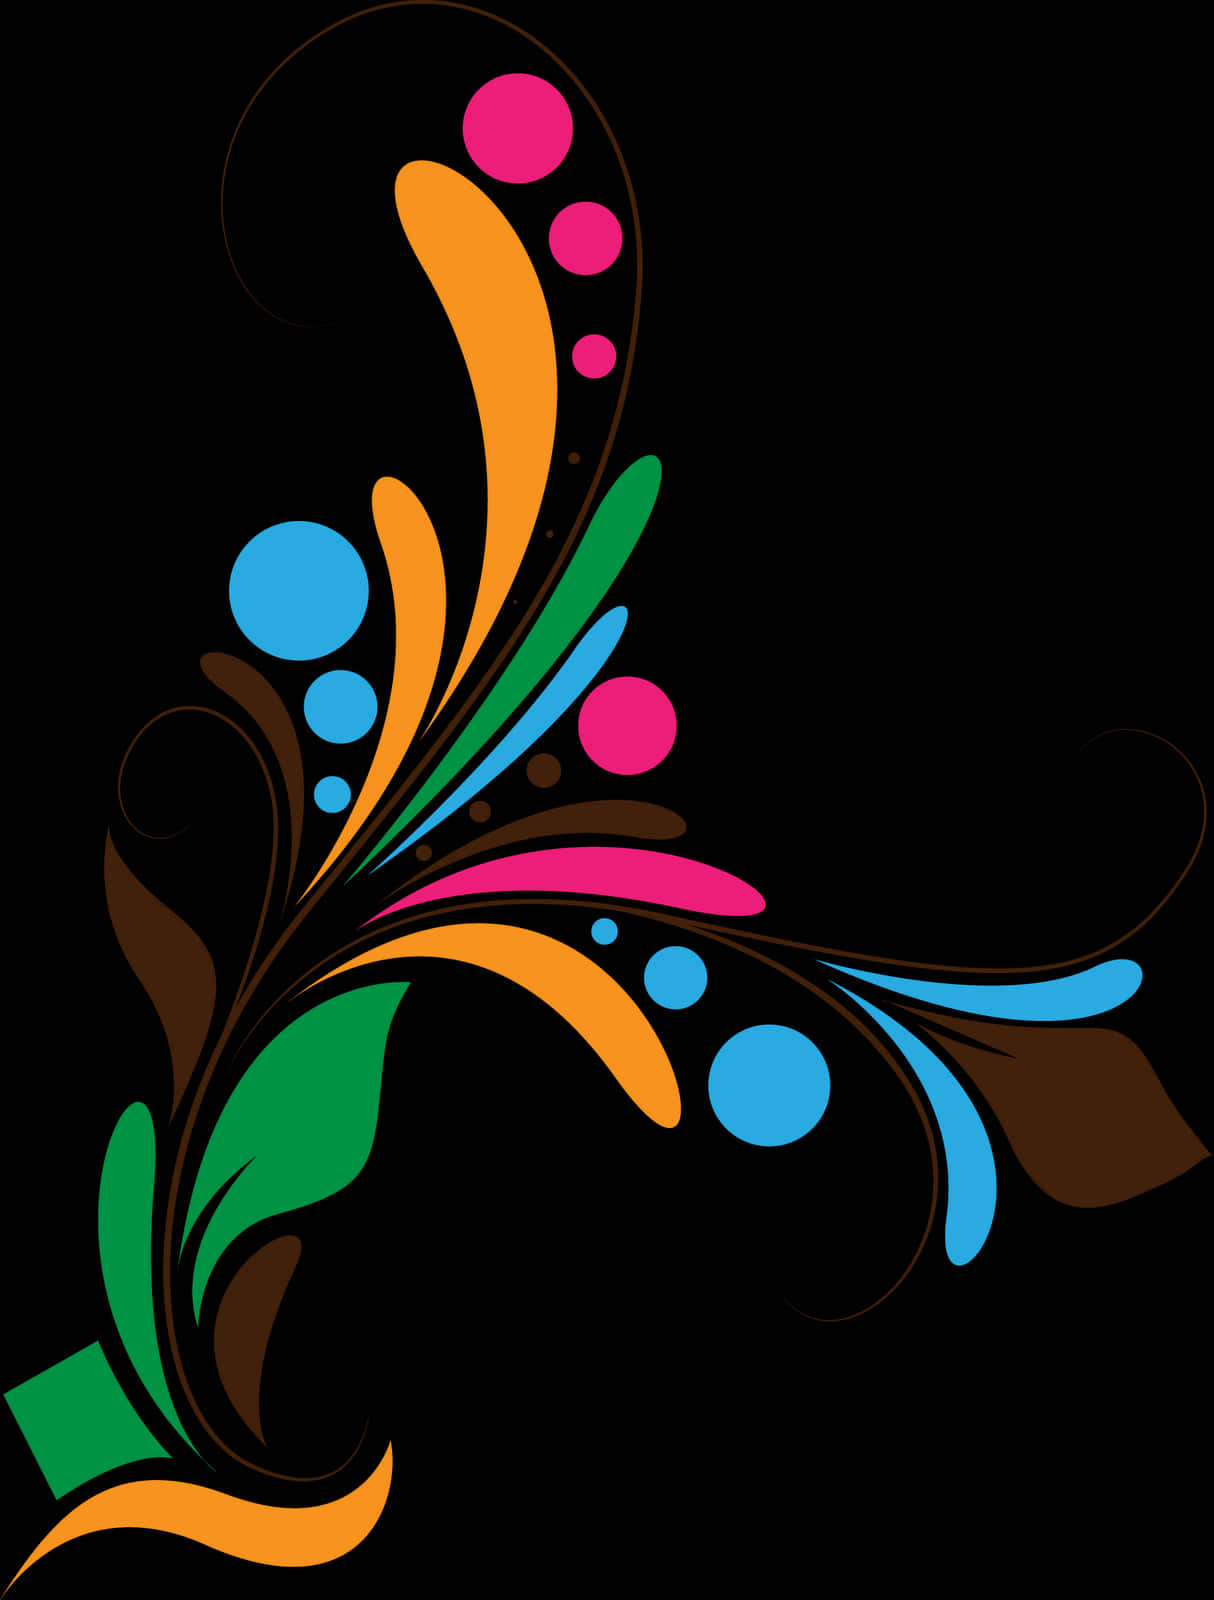 A Colorful Swirly Design On A Black Background